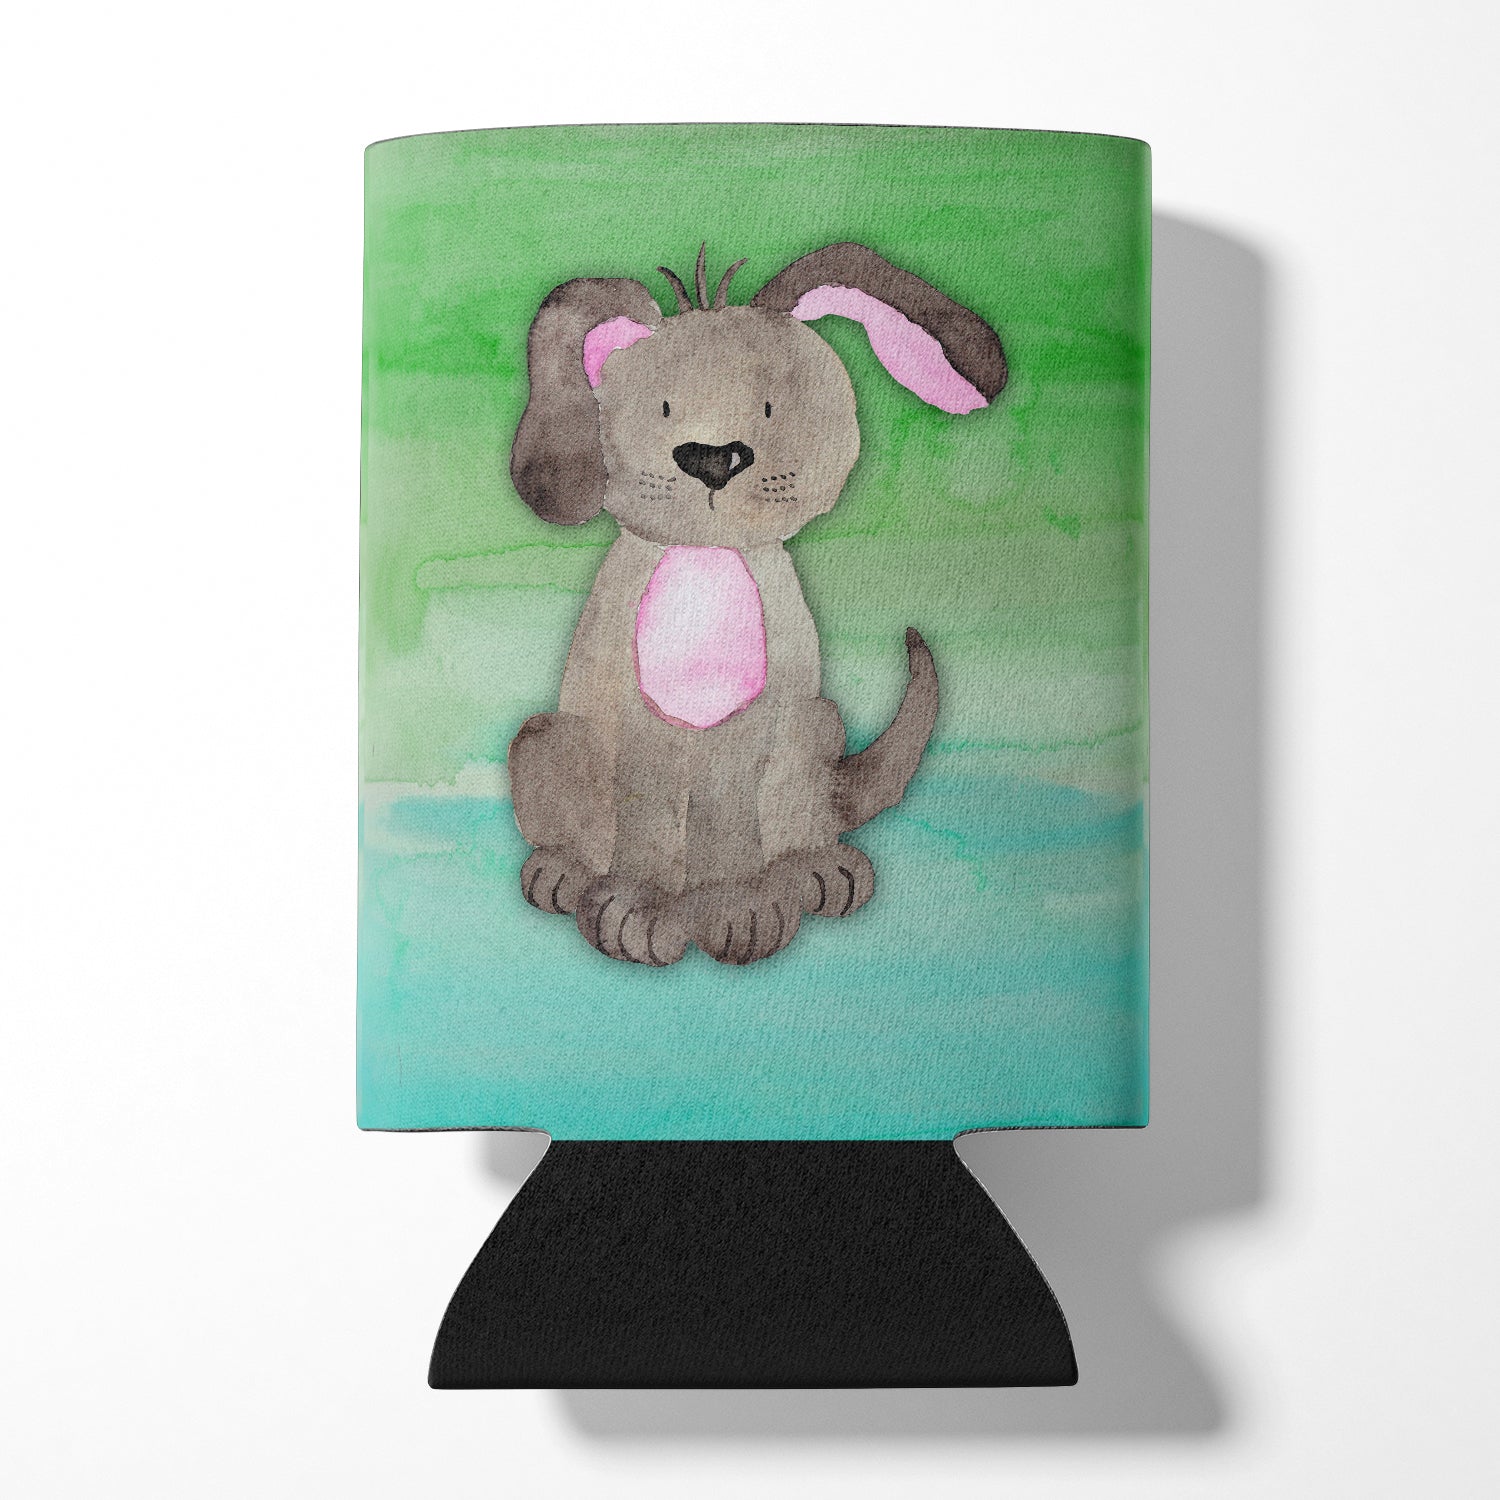 Dog Teal and Green Watercolor Can or Bottle Hugger BB7357CC  the-store.com.